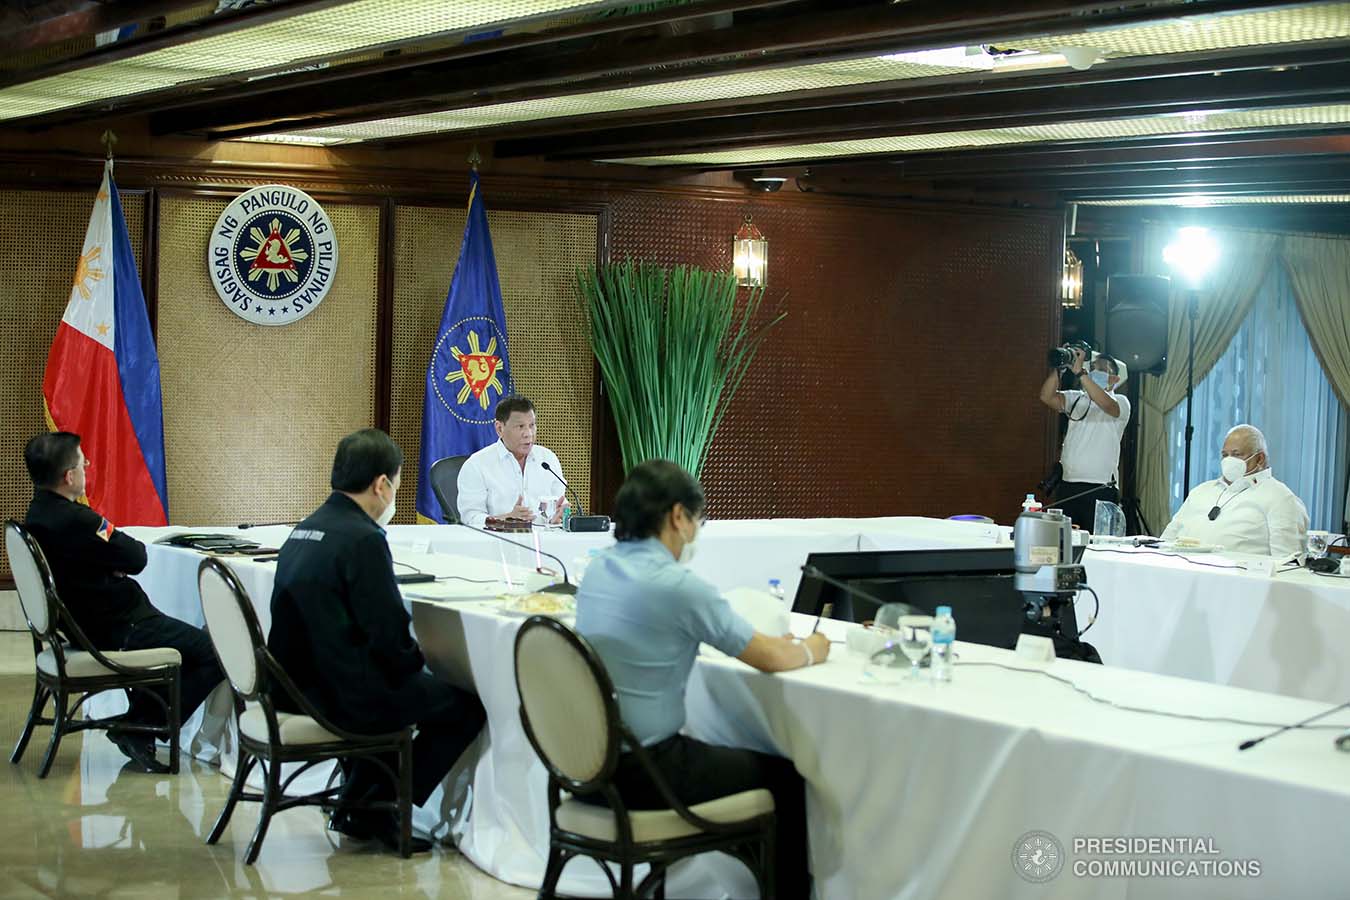 President Rodrigo Roa Duterte presides over a meeting with the Inter-Agency Task Force on the Emerging Infectious Diseases (IATF-EID) core members at the Malacañan Palace on January 6, 2022. ROBINSON NIÑAL/ PRESIDENTIAL PHOTO